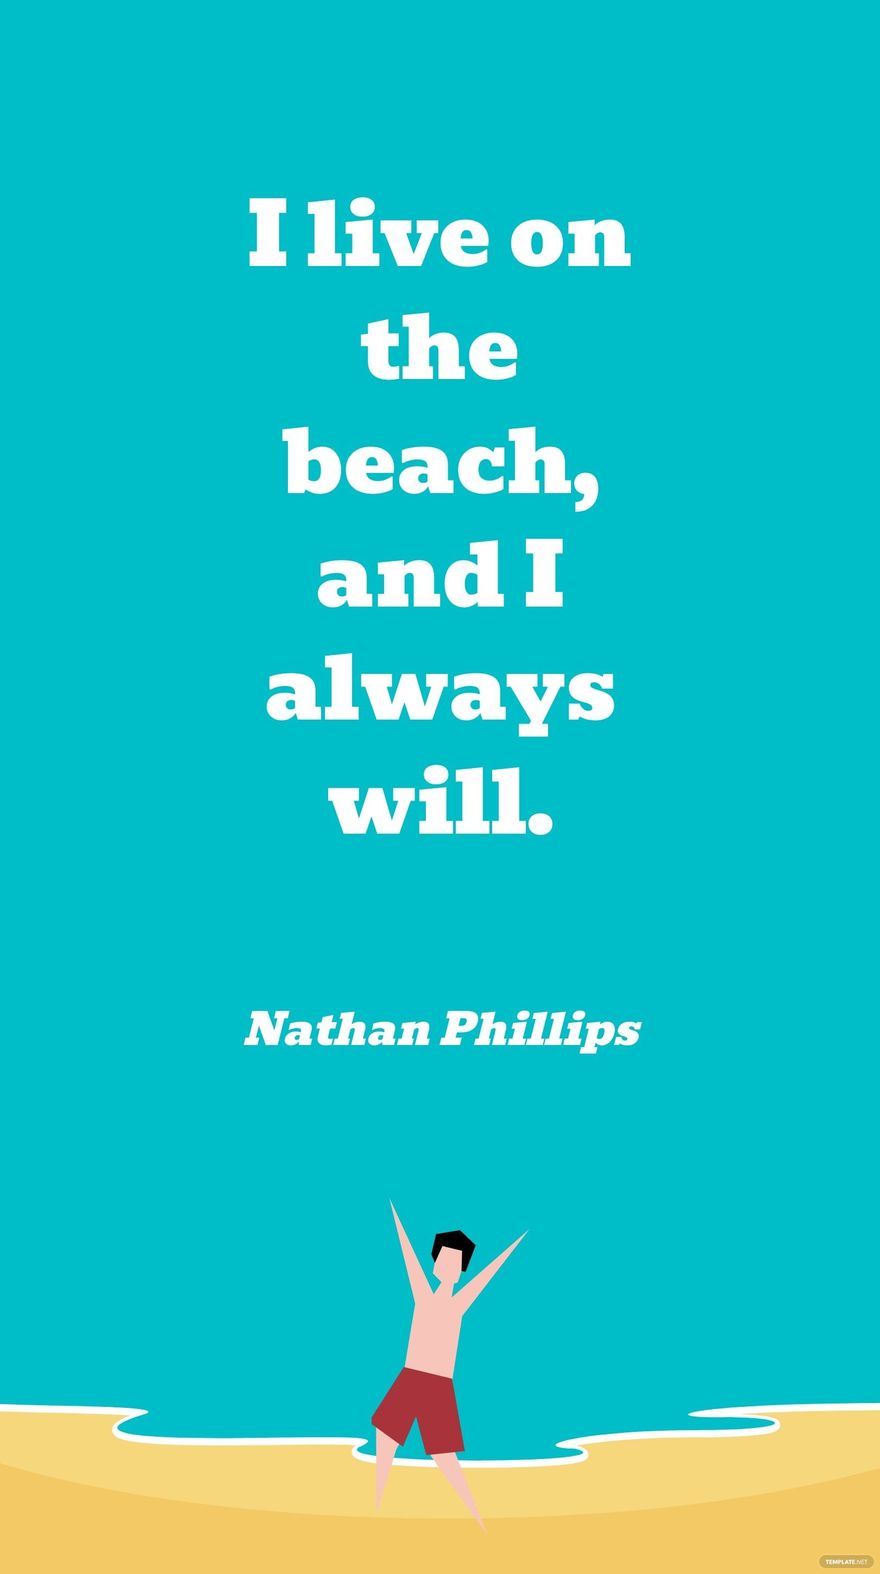 Free Nathan Phillips - I live on the beach, and I always will. in JPG